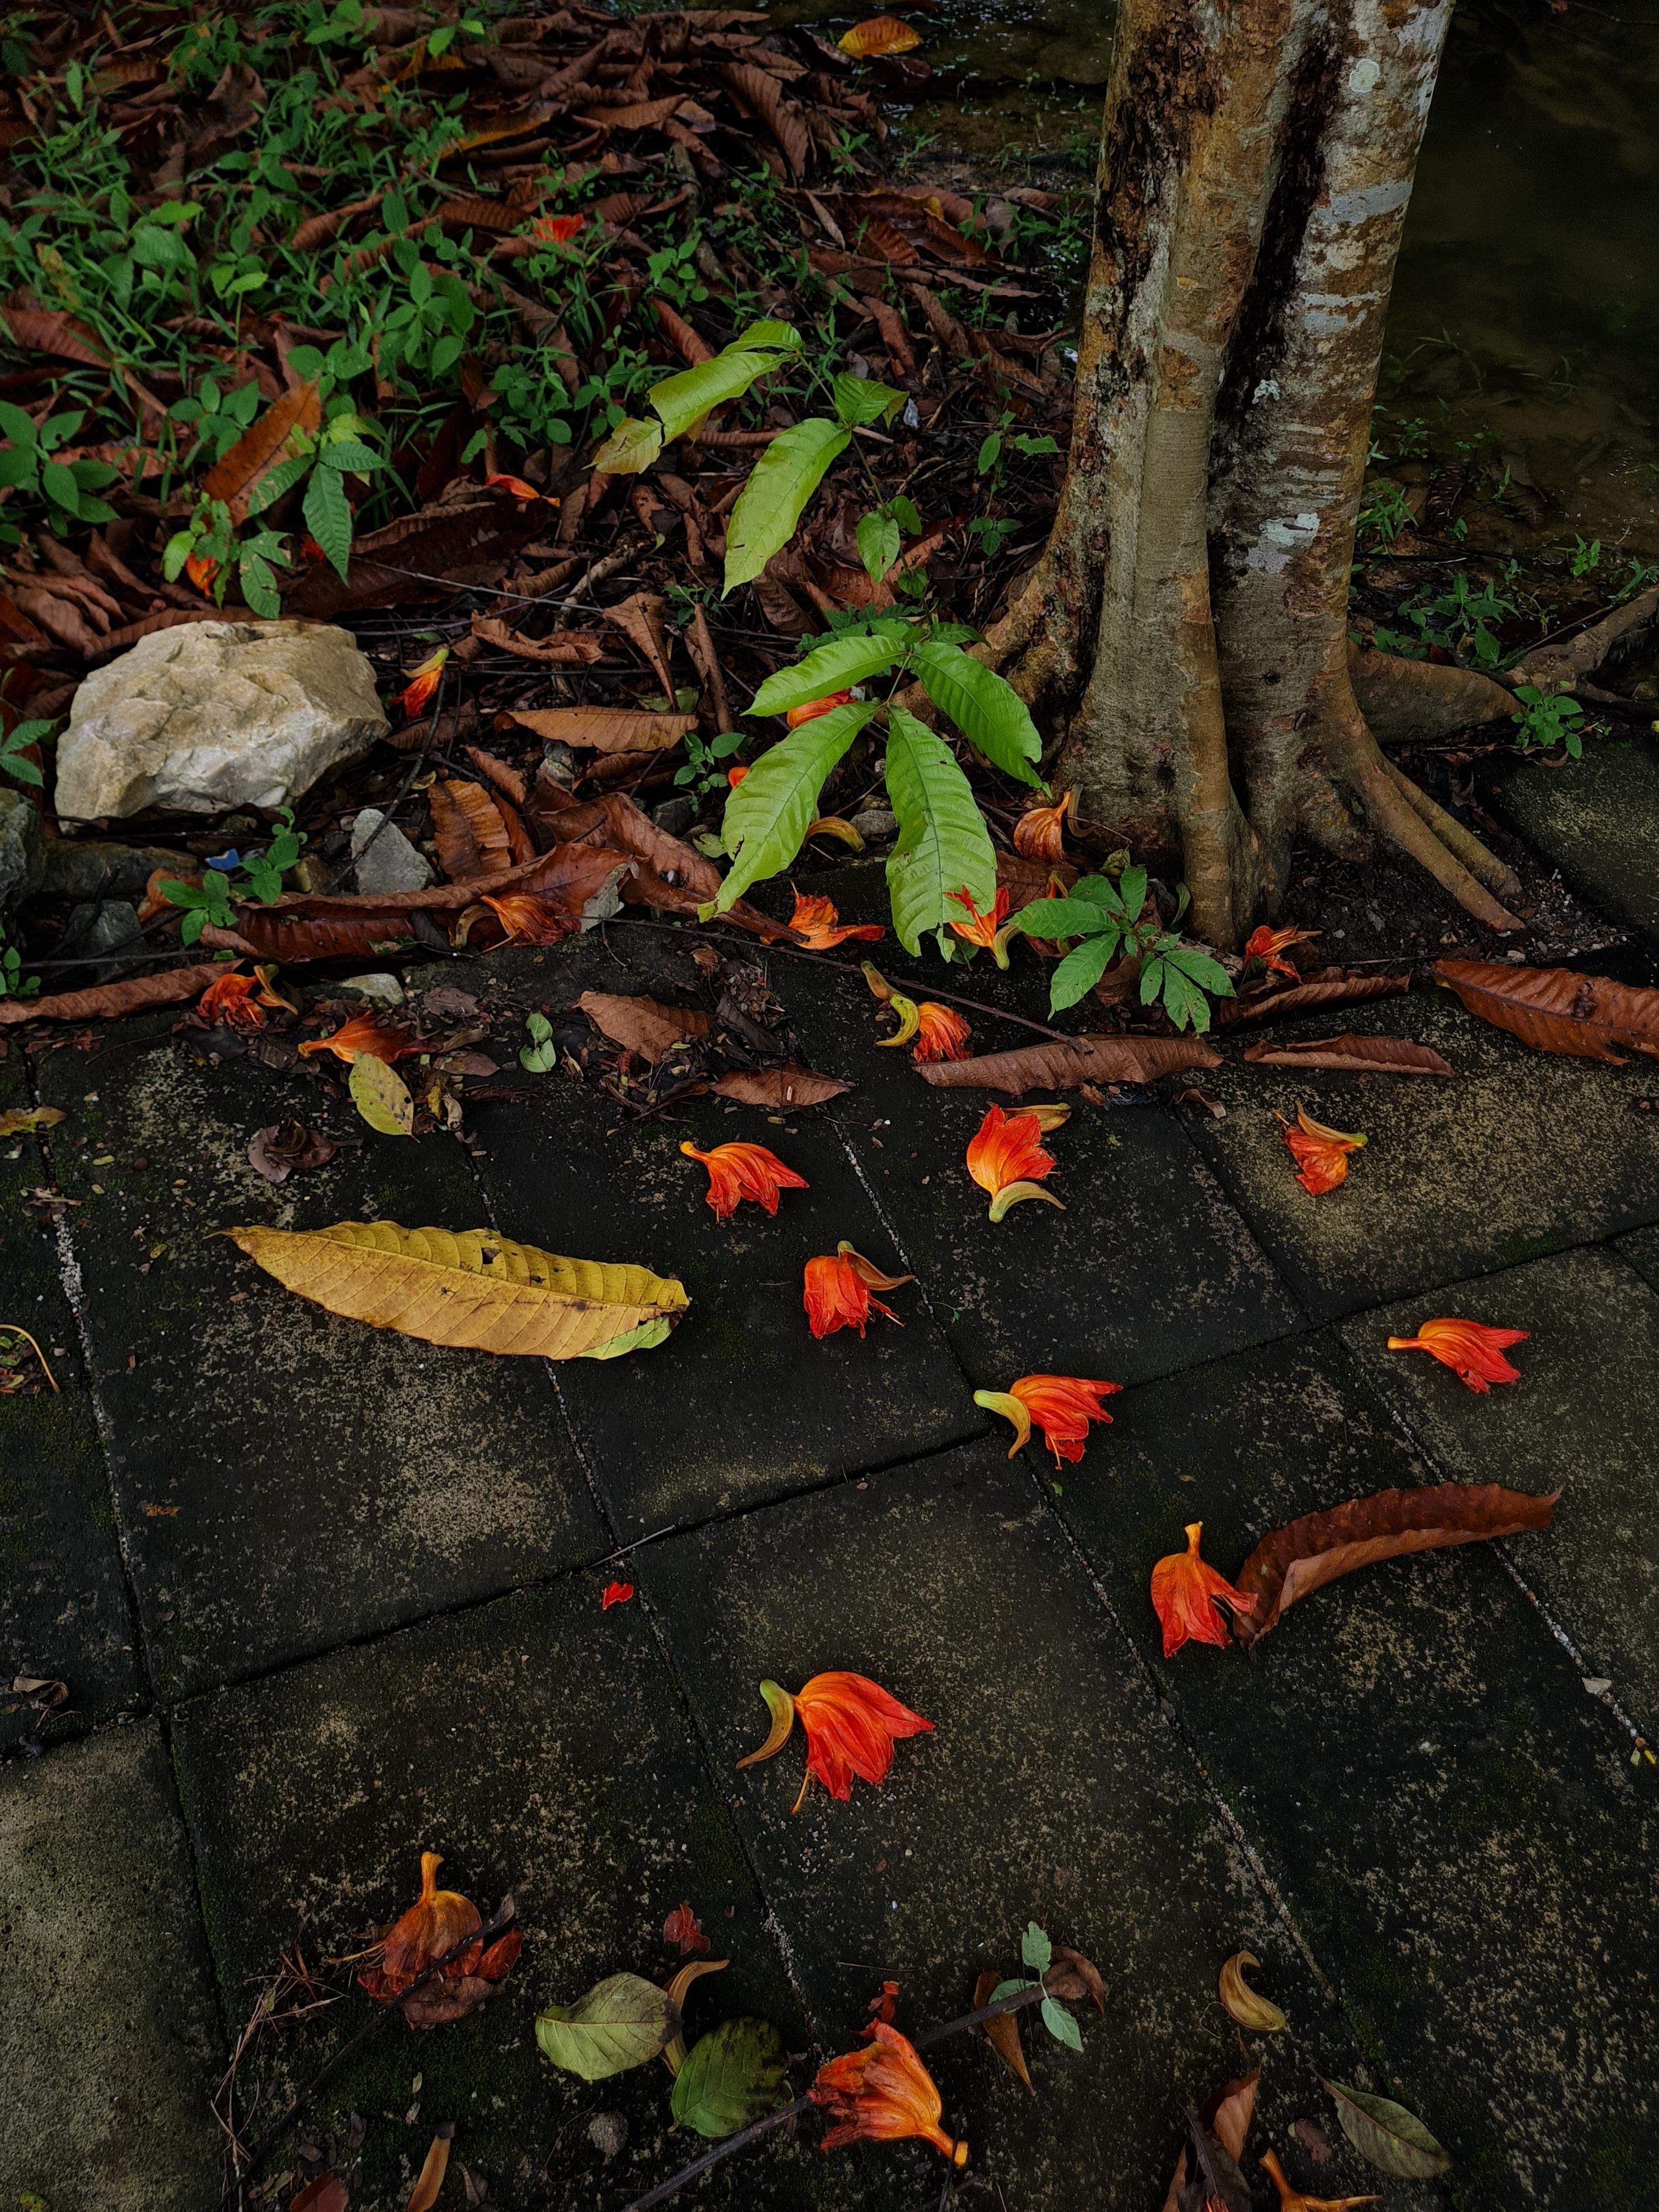 Malaysian Contemporary Photography by Jess Hon - Pretty Littered Walkway